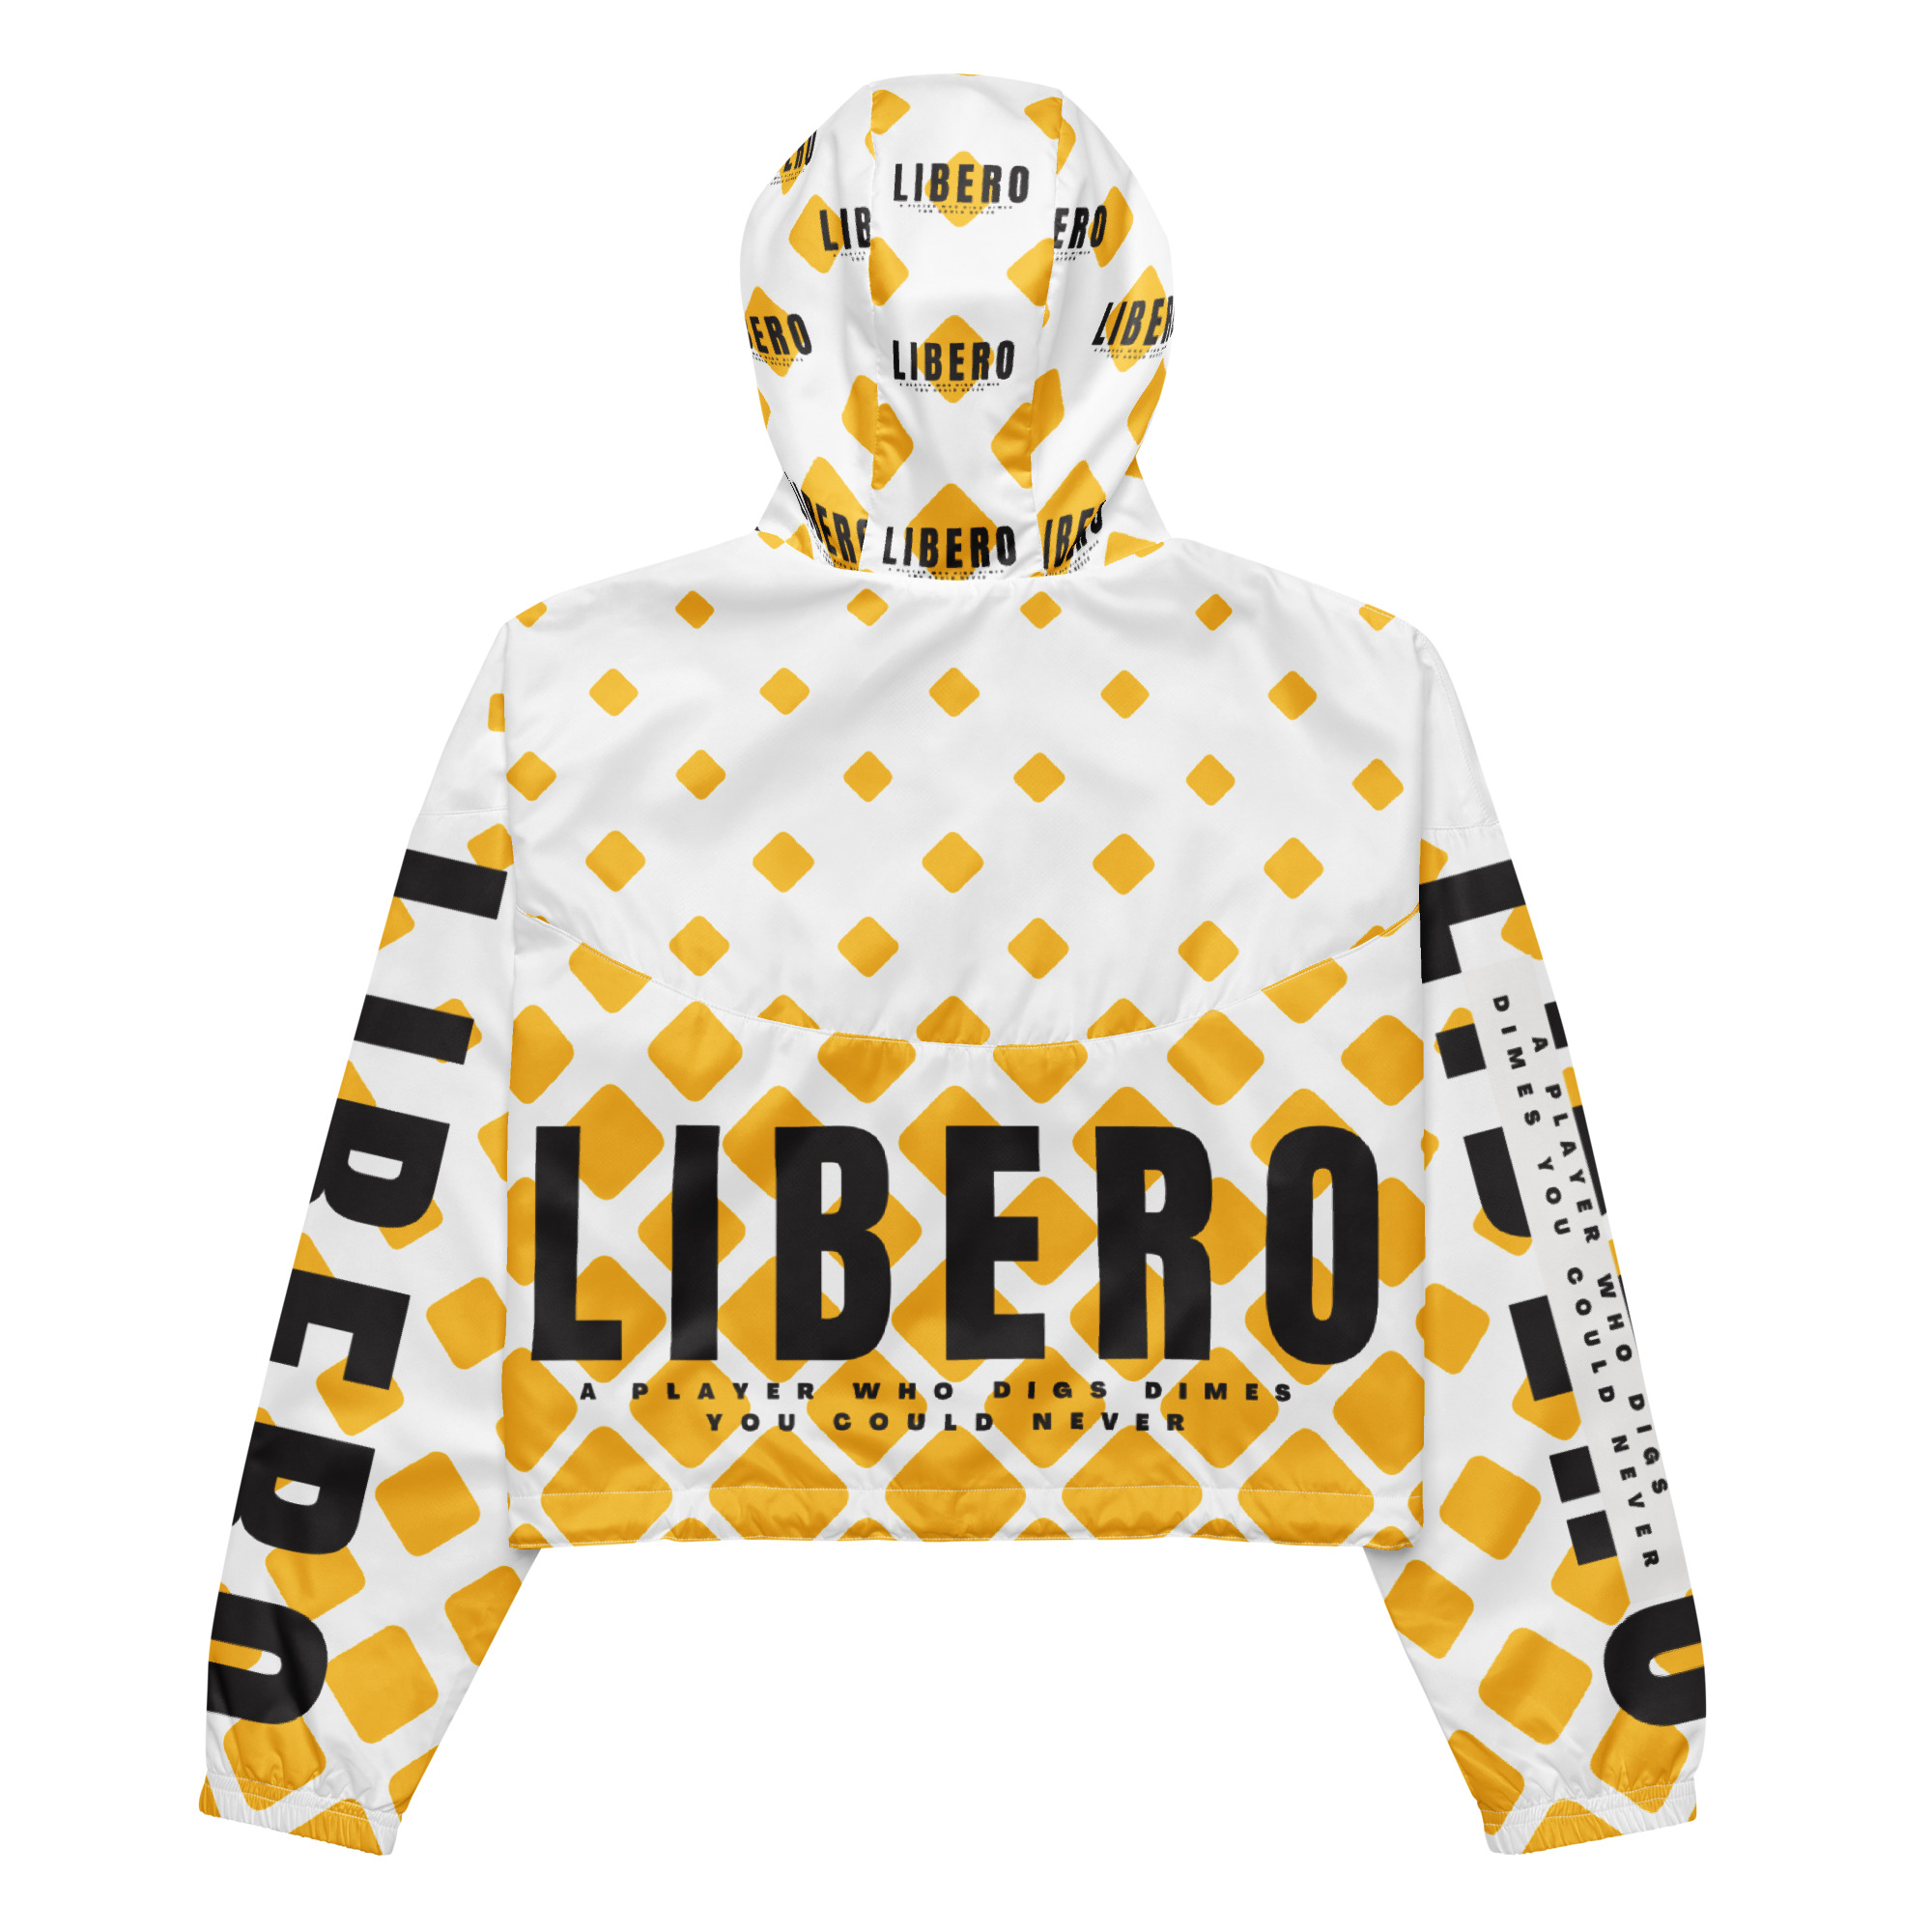 Dont buy my Volleybragswag volleyball shirts with inspiring quotes like "LIBERO - A Player Who Digs Dimes You Could Never" if you dont like color or comfort, dont like to be noticed or dont like liberos with swag.

Volleybragswag Crop-windbreaker-jacket-yellowdiamonds-Libero